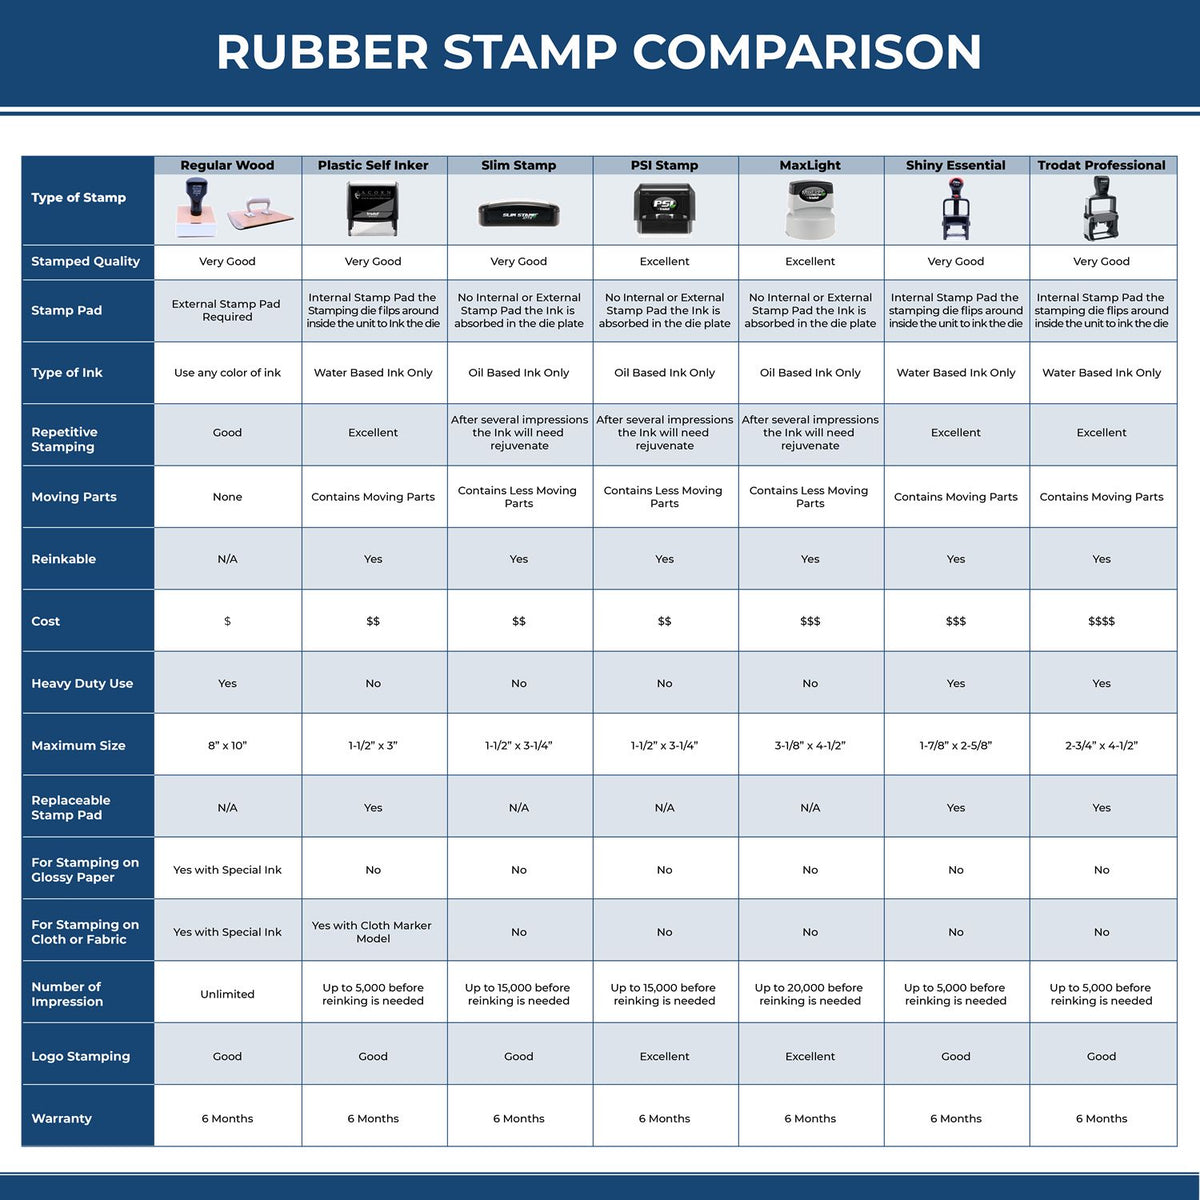 A comparison chart for the different types of mount models available for the Premium MaxLight Pre-Inked Wyoming Landscape Architectural Stamp.